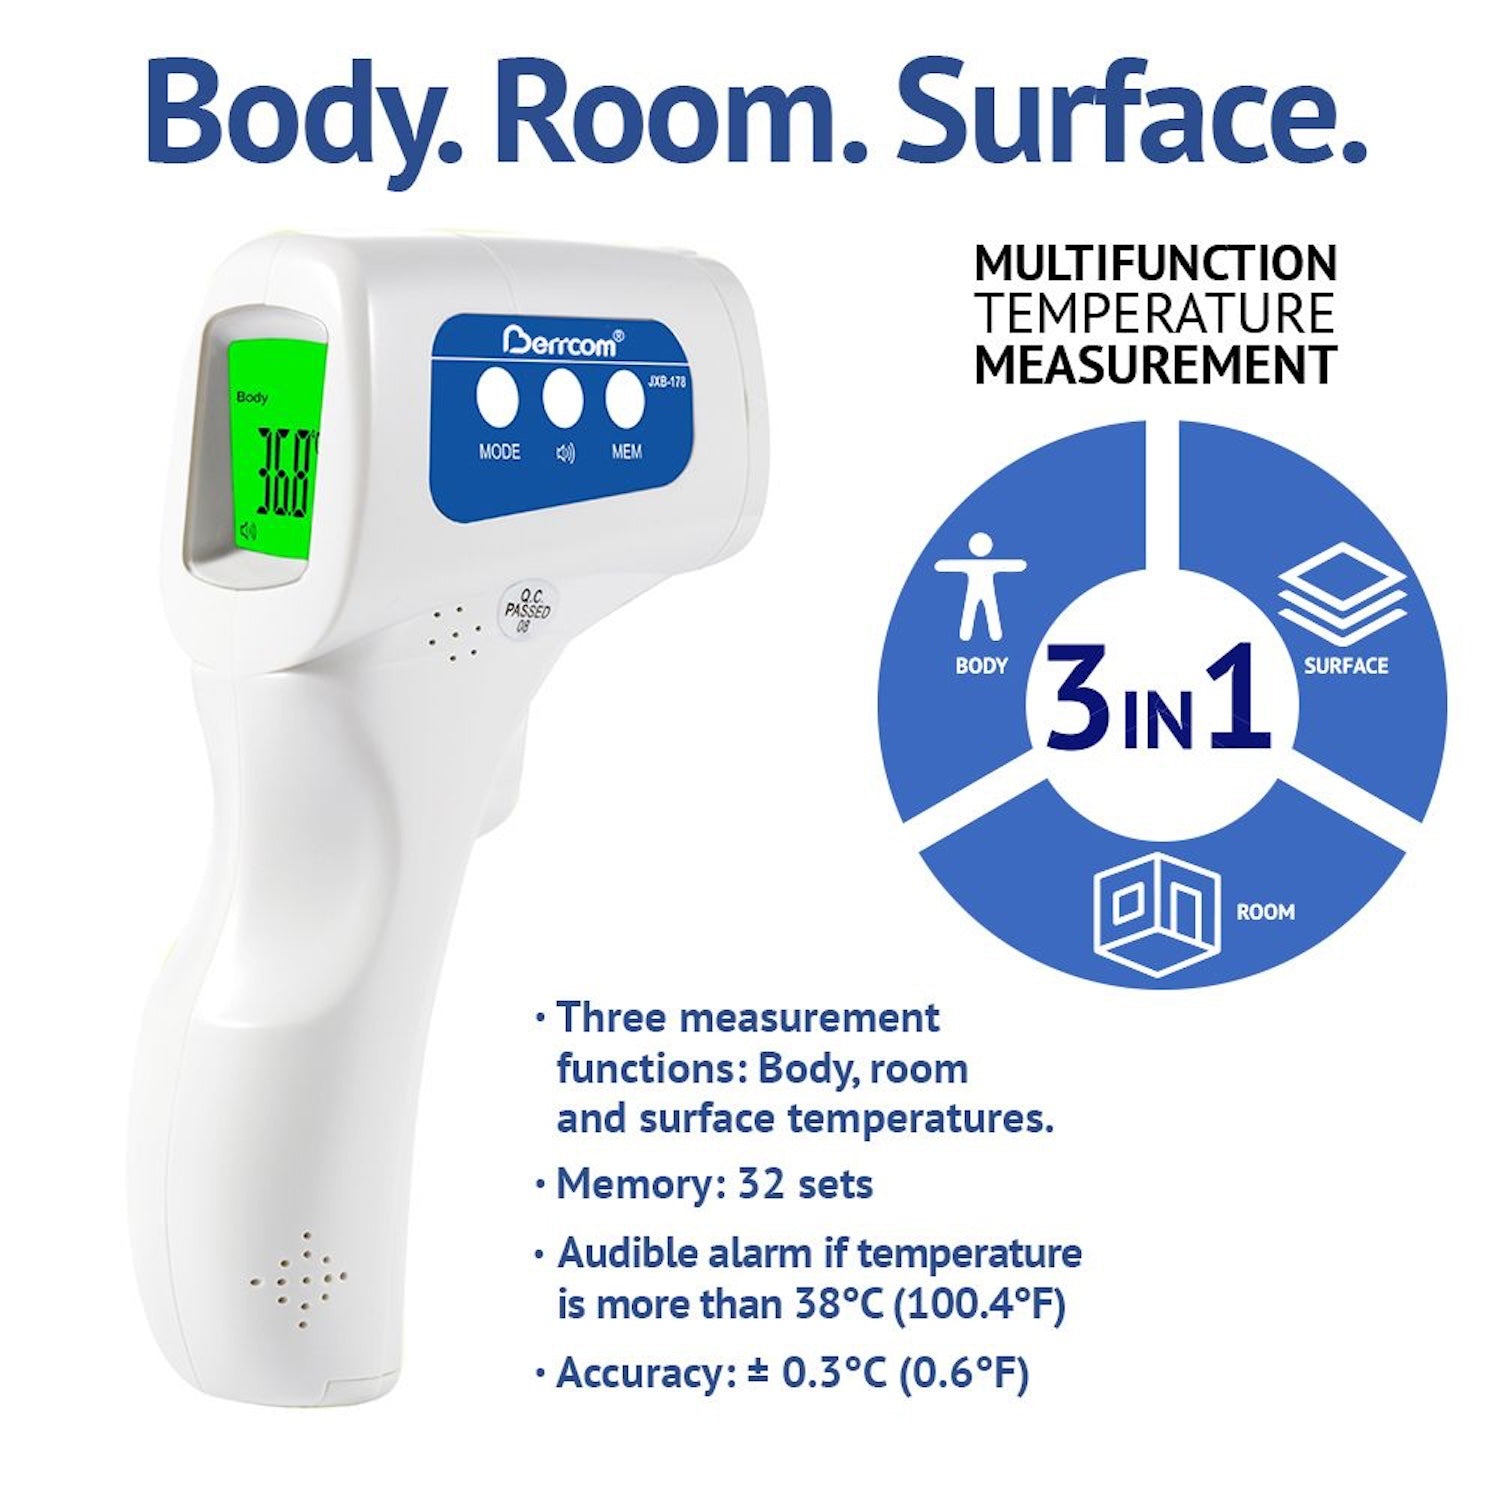 Berrcom Non-Contact Infrared 3-in-1 Thermometer | Medical Grade Multifunction Design (5)